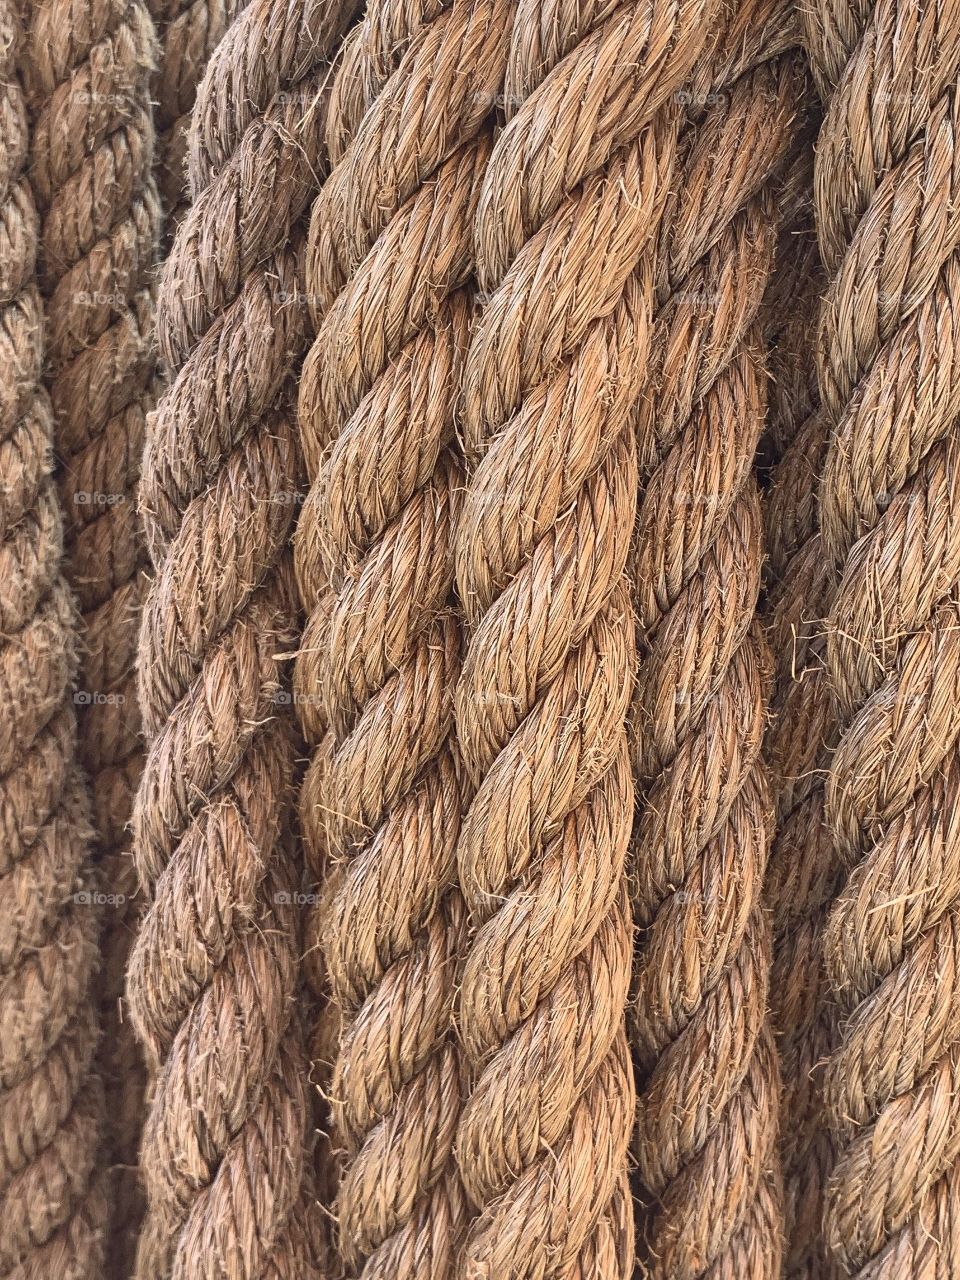 Rope or Repunzel? The textures in this piece are beautiful and can only be found in braided rope